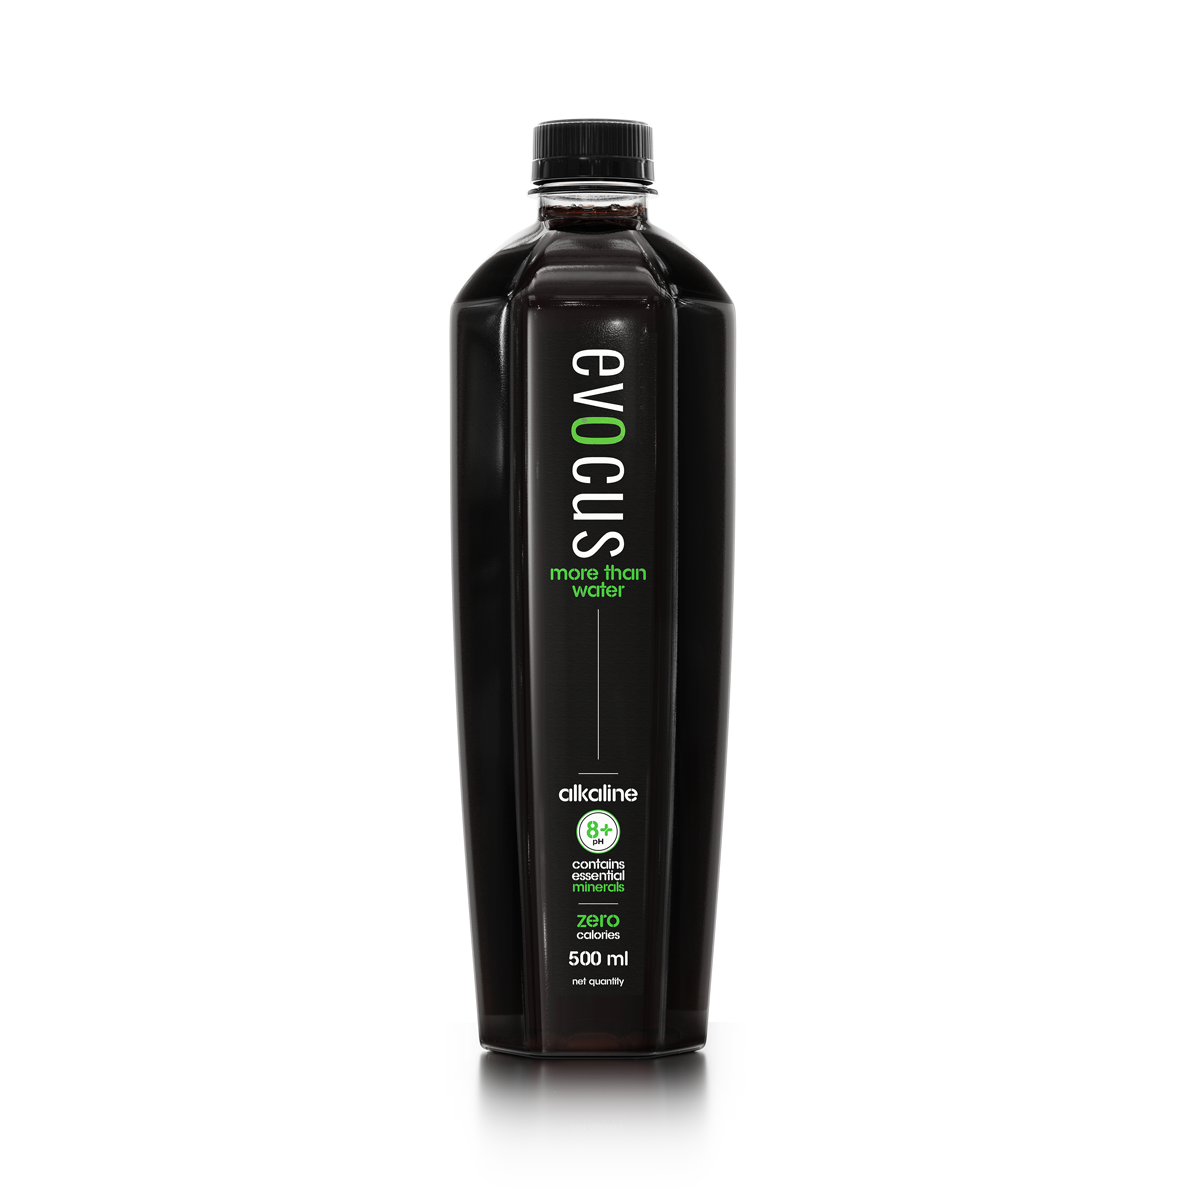  Evocus Black Alkaline Water, 8+ pH Water, Infused with  Essential Minerals, Keeps you Hydrated, PACK OF 6 * 500 ml EACH, ZERO  SUGAR, ZERO CALORIES, ZERO CARBS